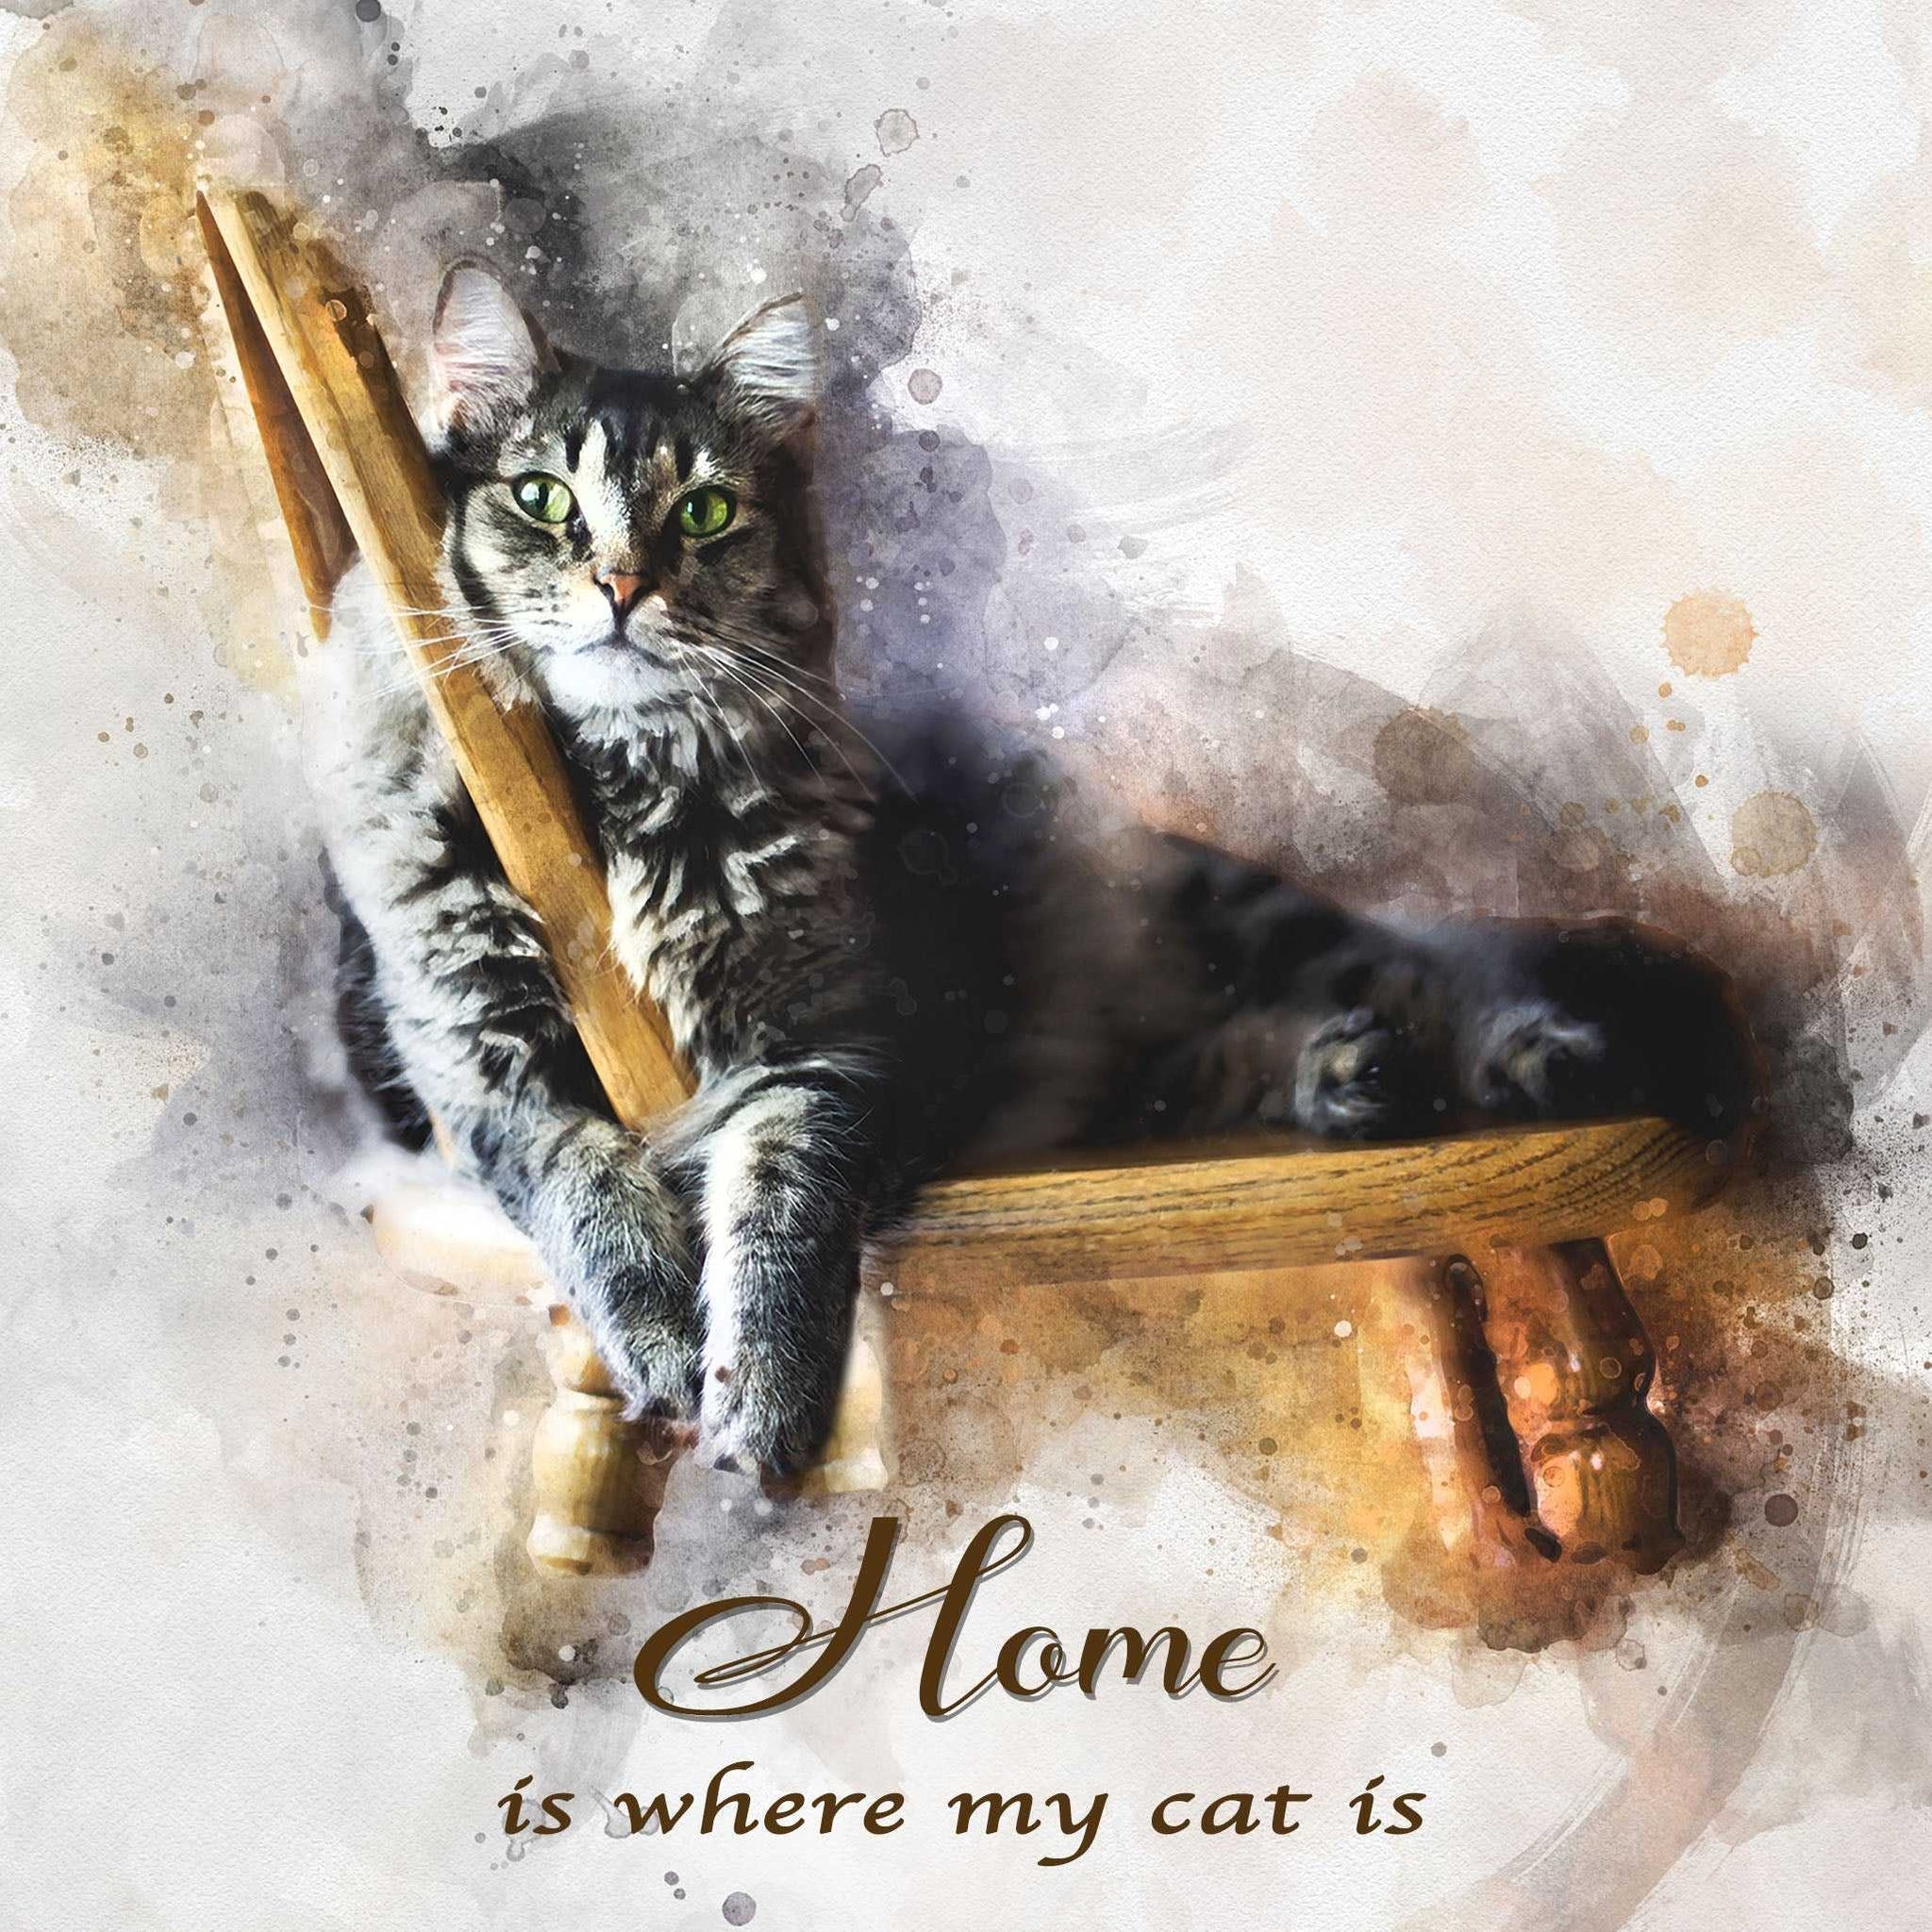 Personalized Gifts for Cat Lovers | Custom Cat Portrait on Canvas | Custom Cat Artwork - FromPicToArt